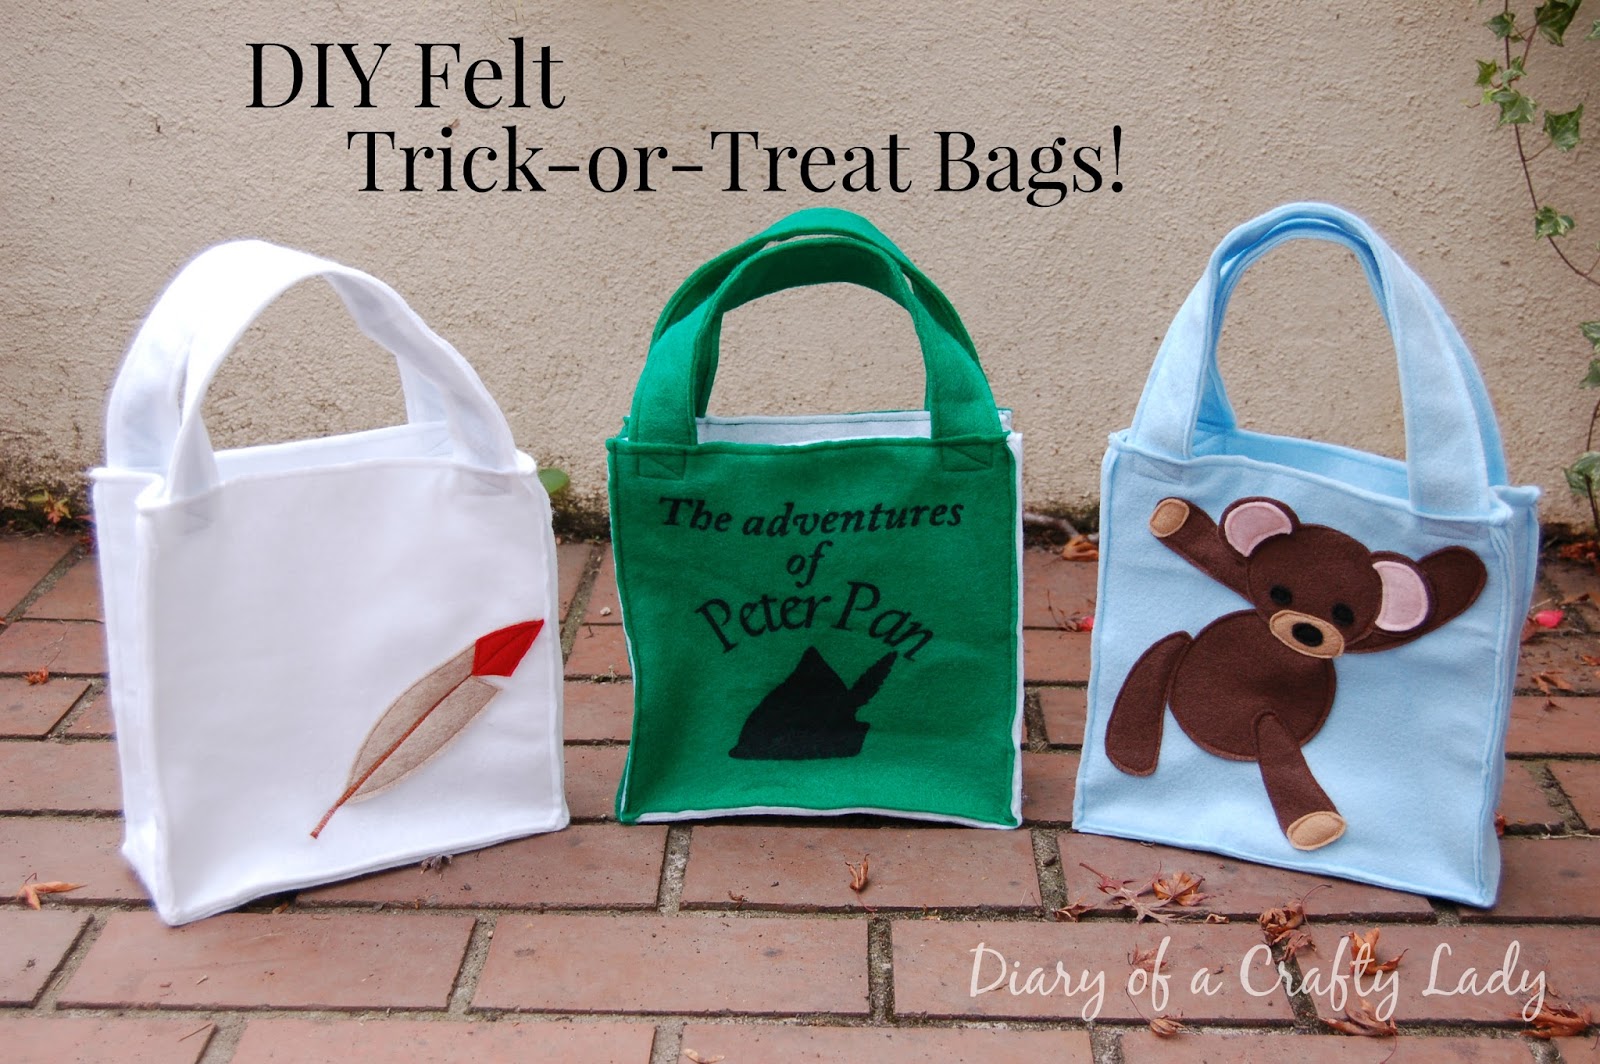 diary-of-a-crafty-lady-peter-pan-felt-trick-or-treat-bags